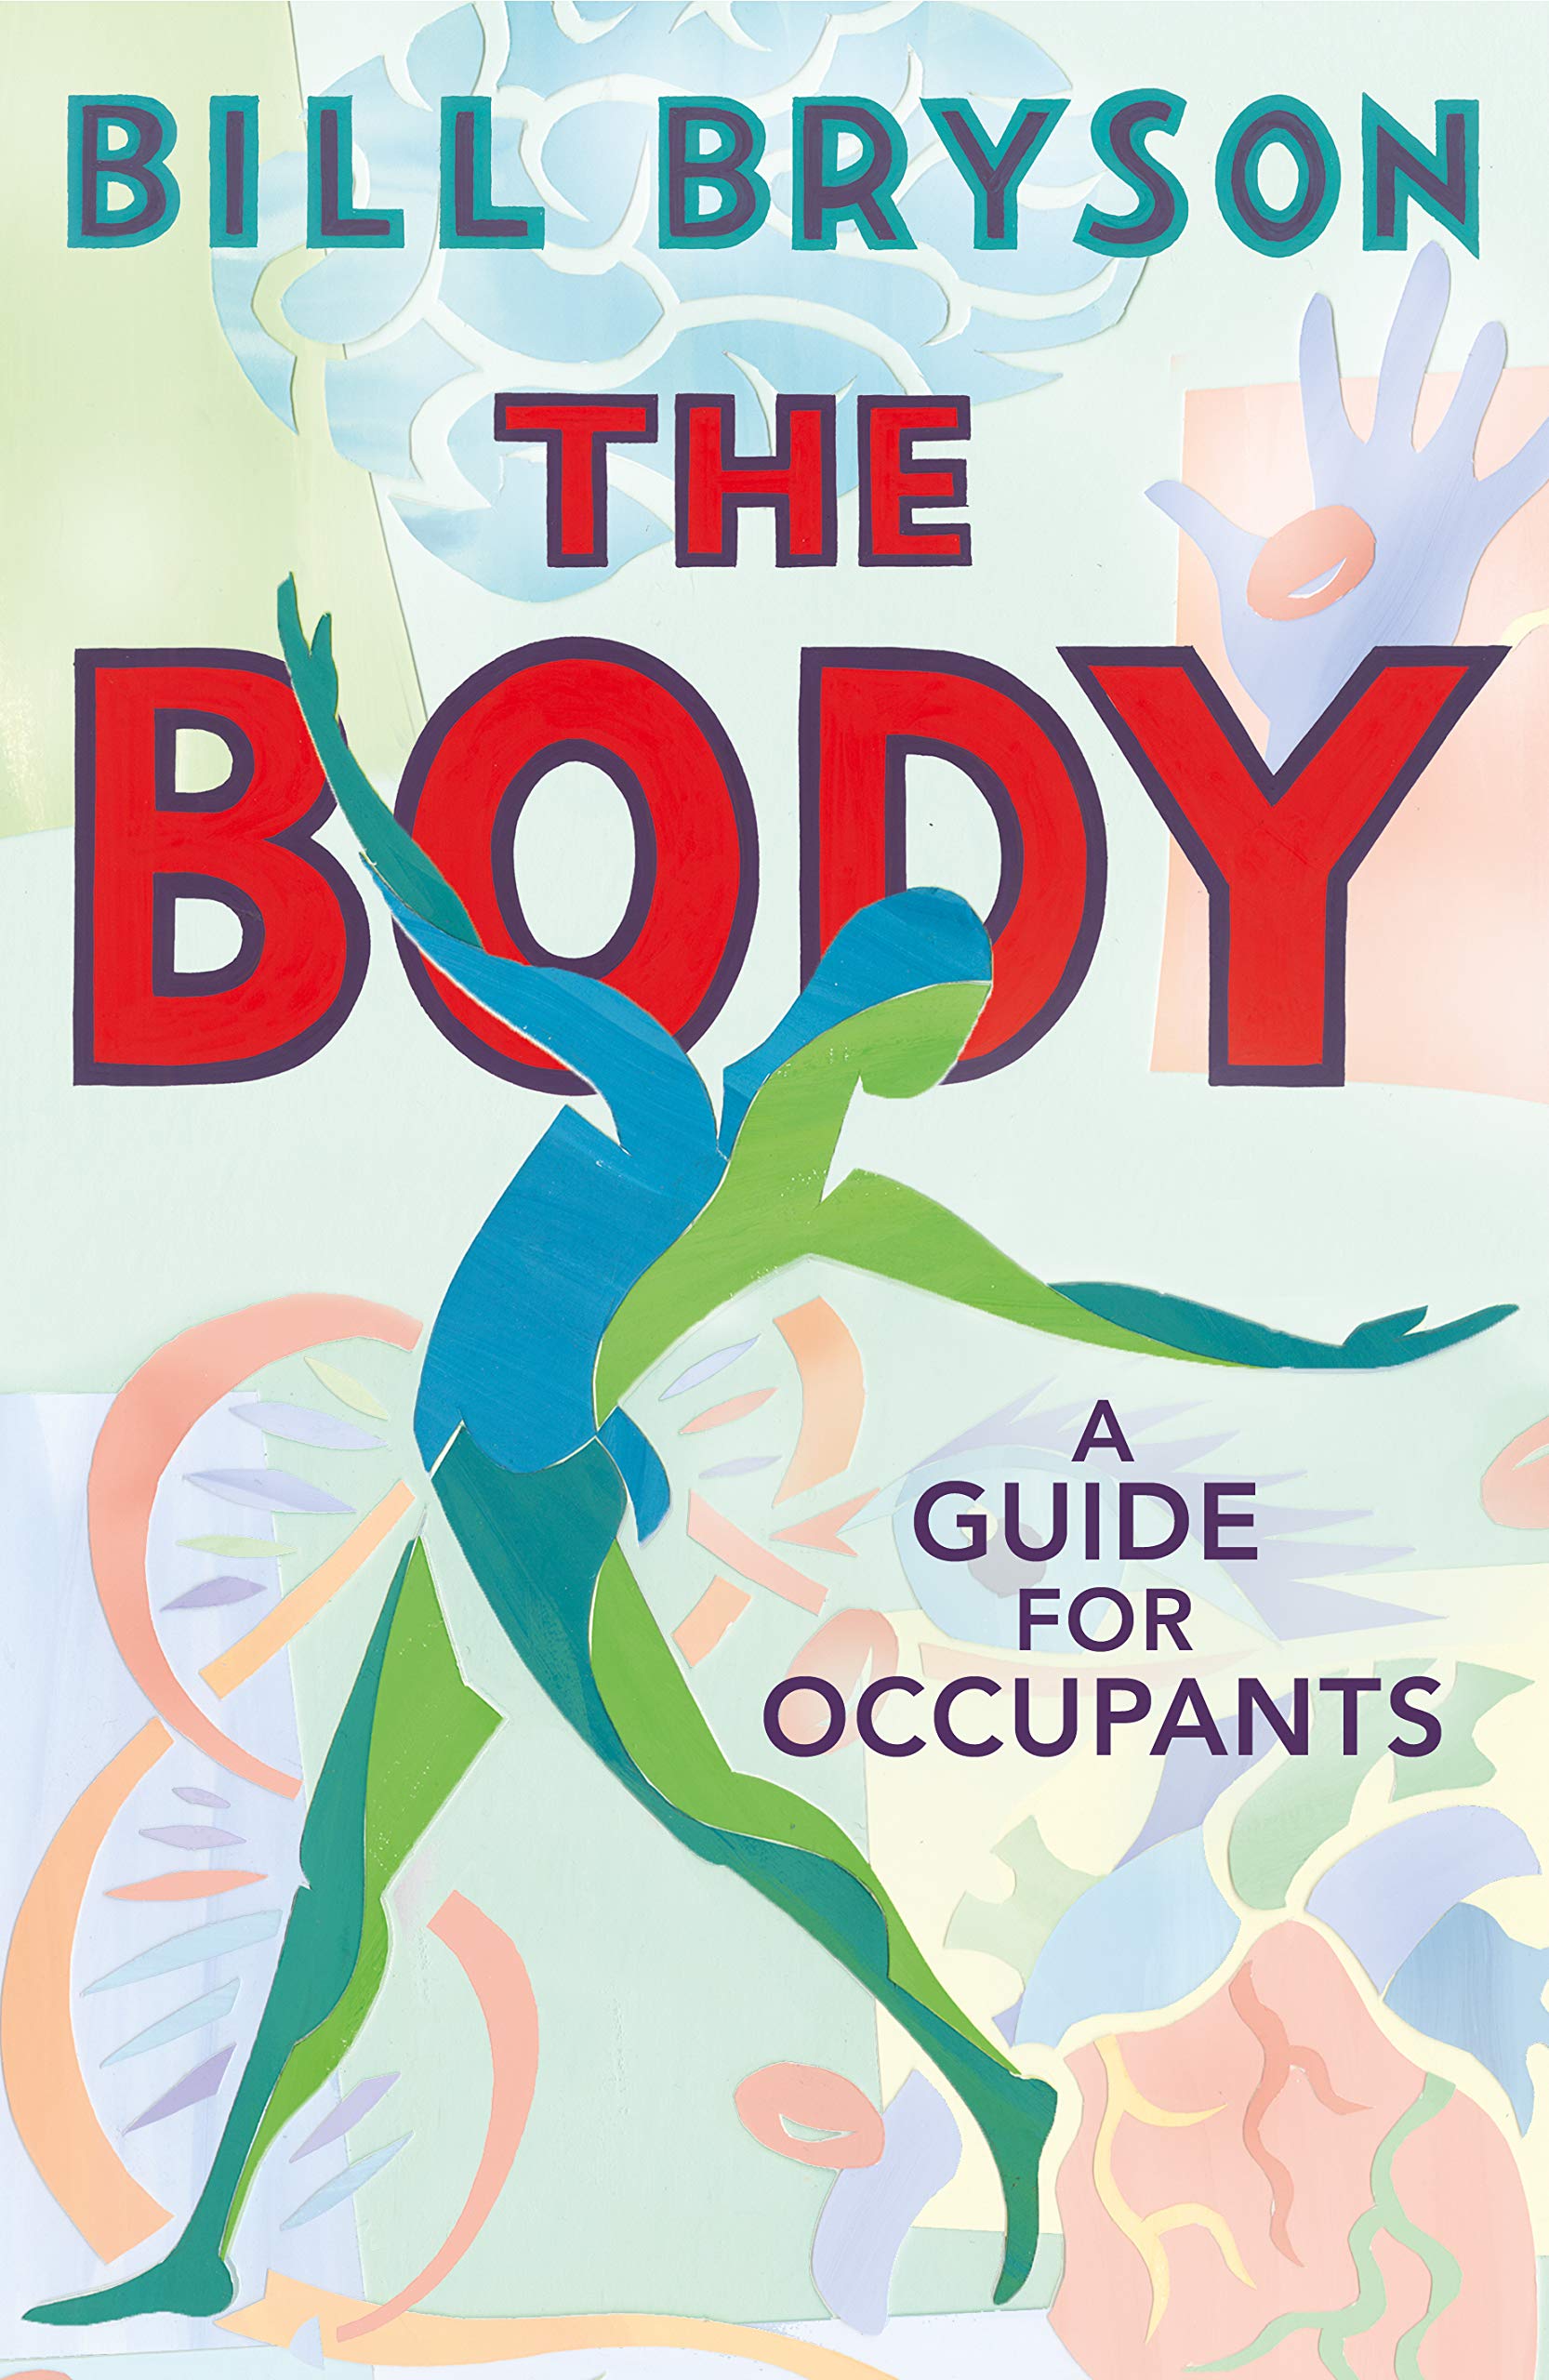 Book Review – The Body: A Guide for Occupants